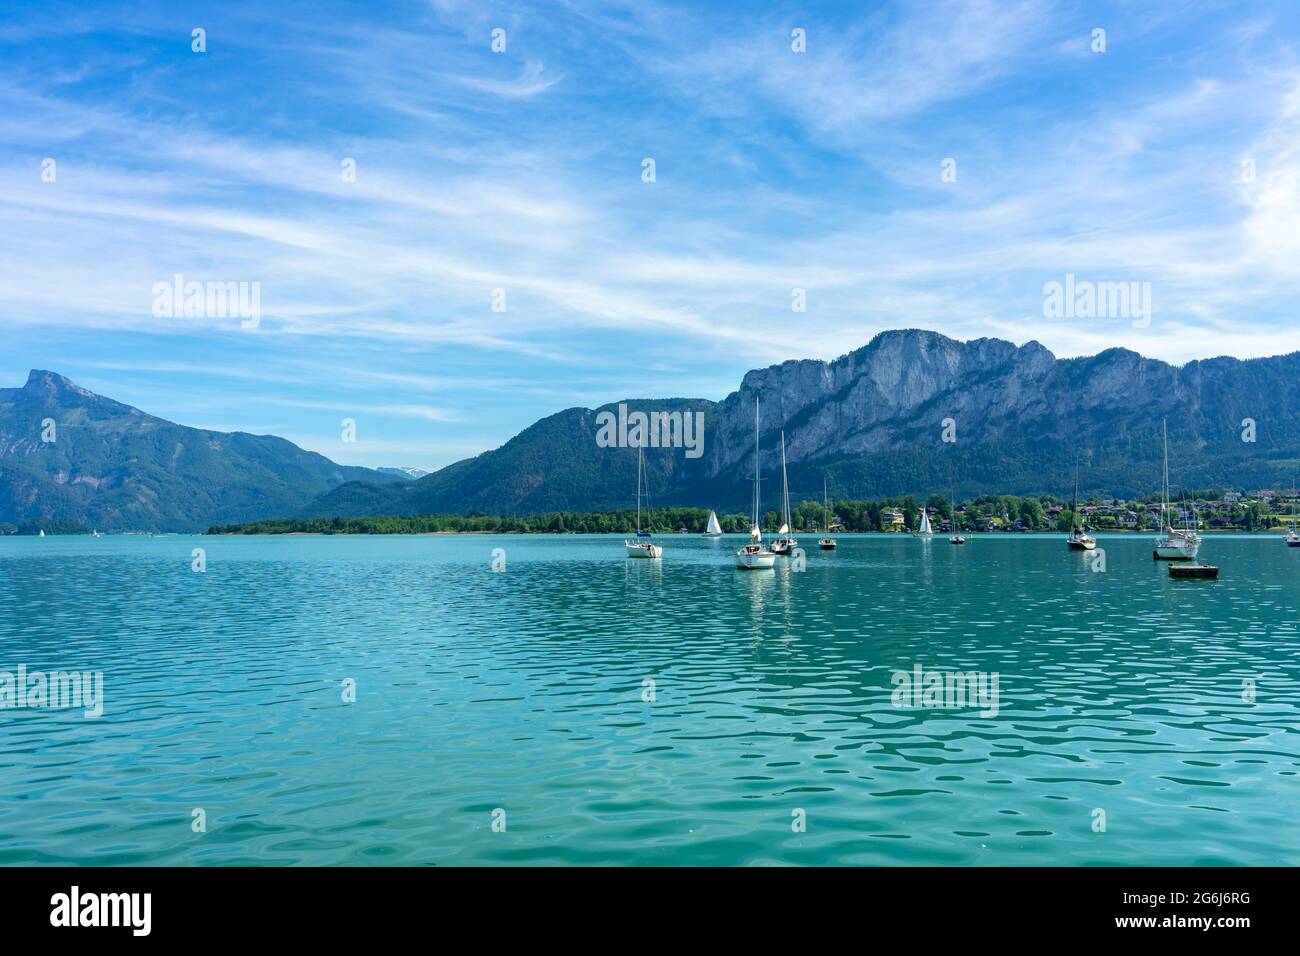 Mondsee with mountains and sailing boats on the water summertime Stock Photo